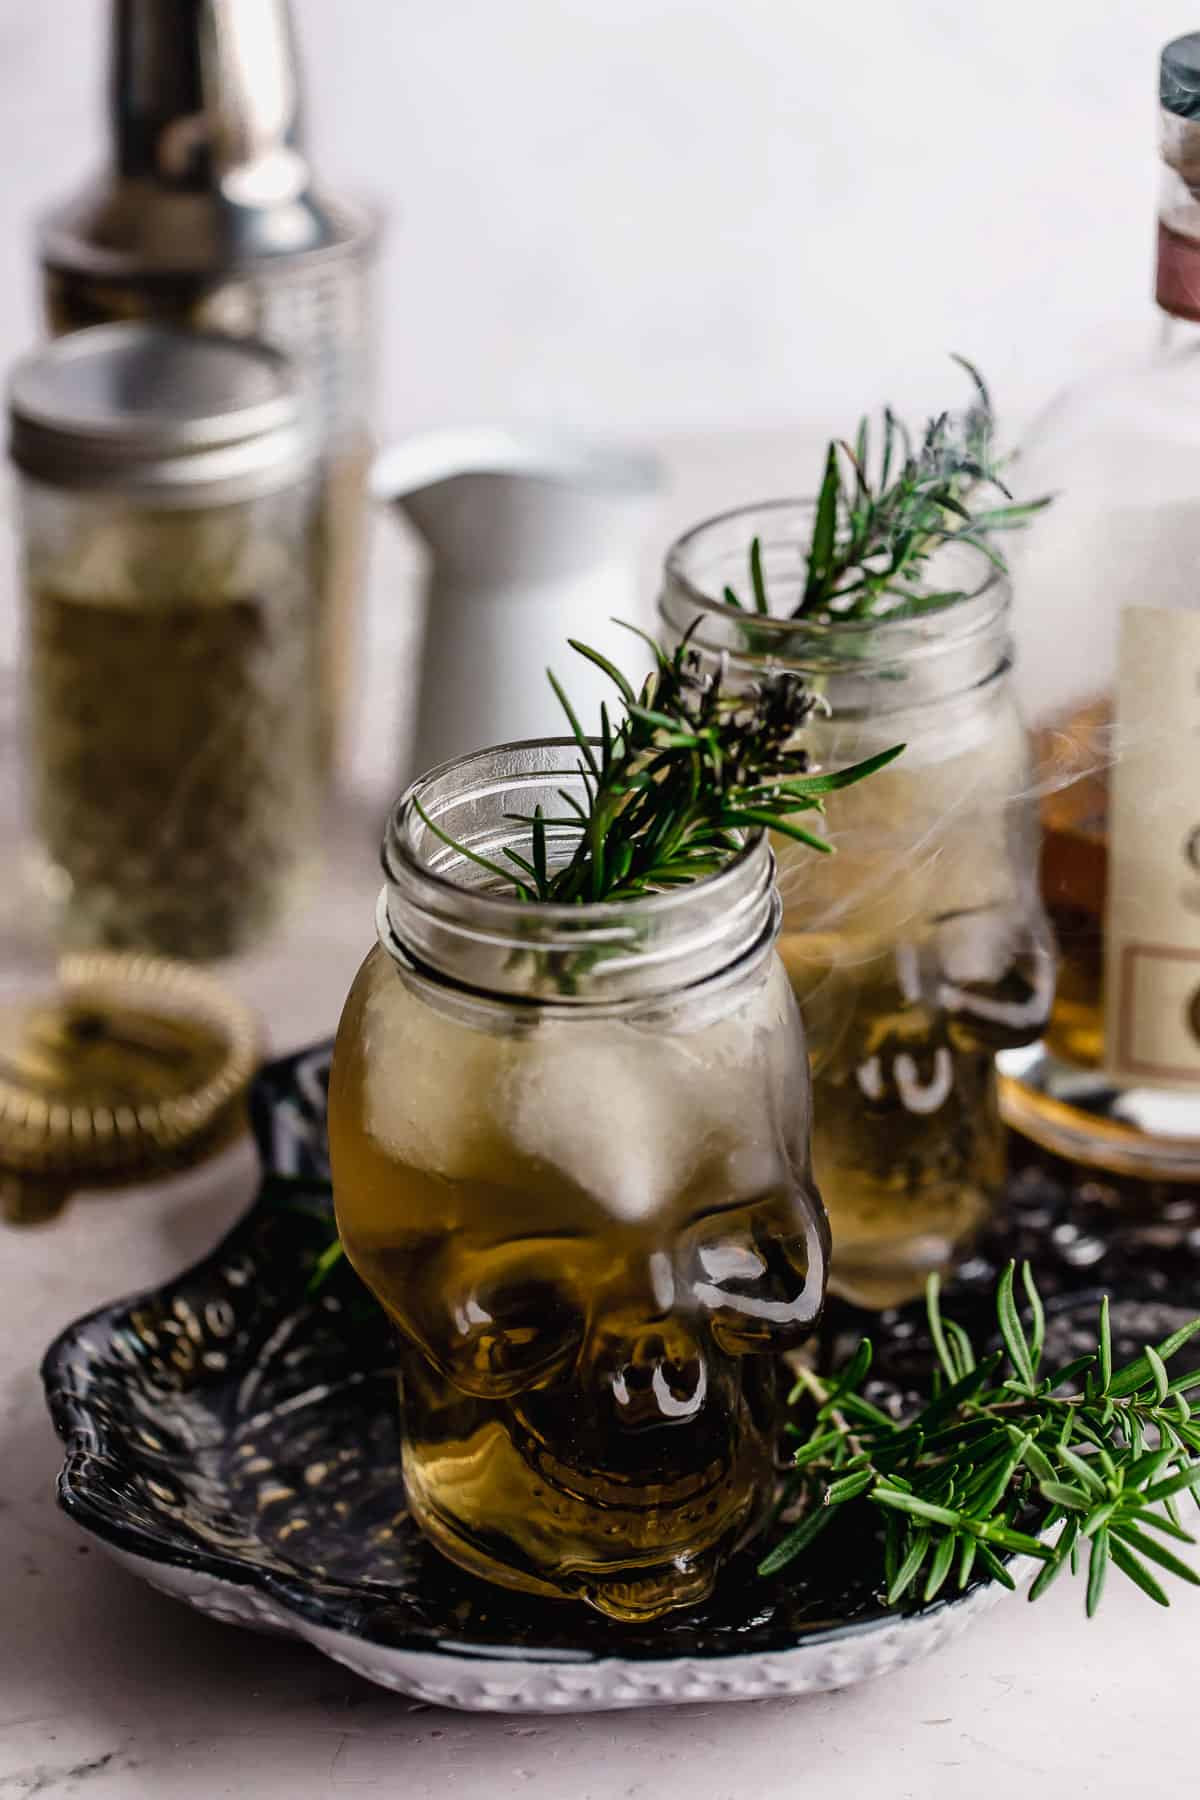 Two grave digger cocktails with smoking rosemary garnish.